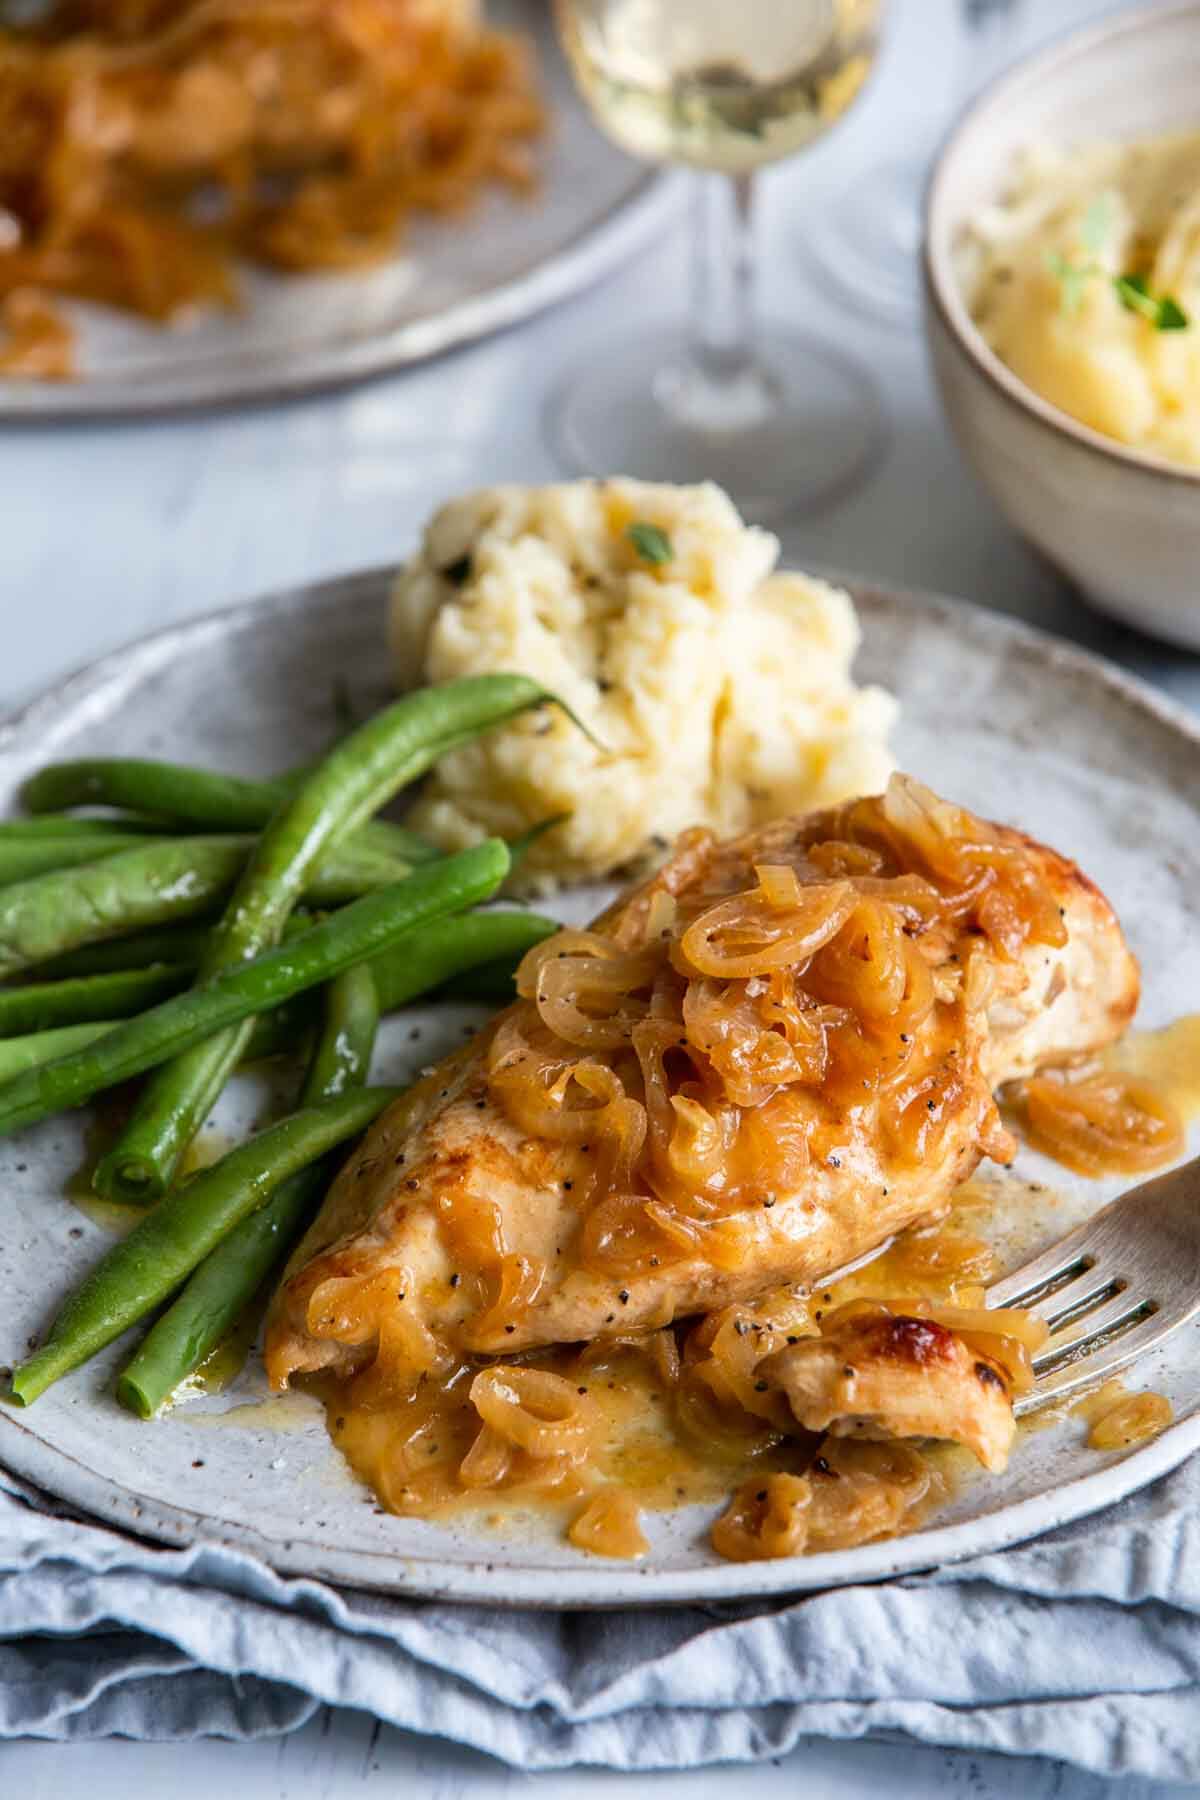 Chicken with shallots on a plate with a side of green beans.